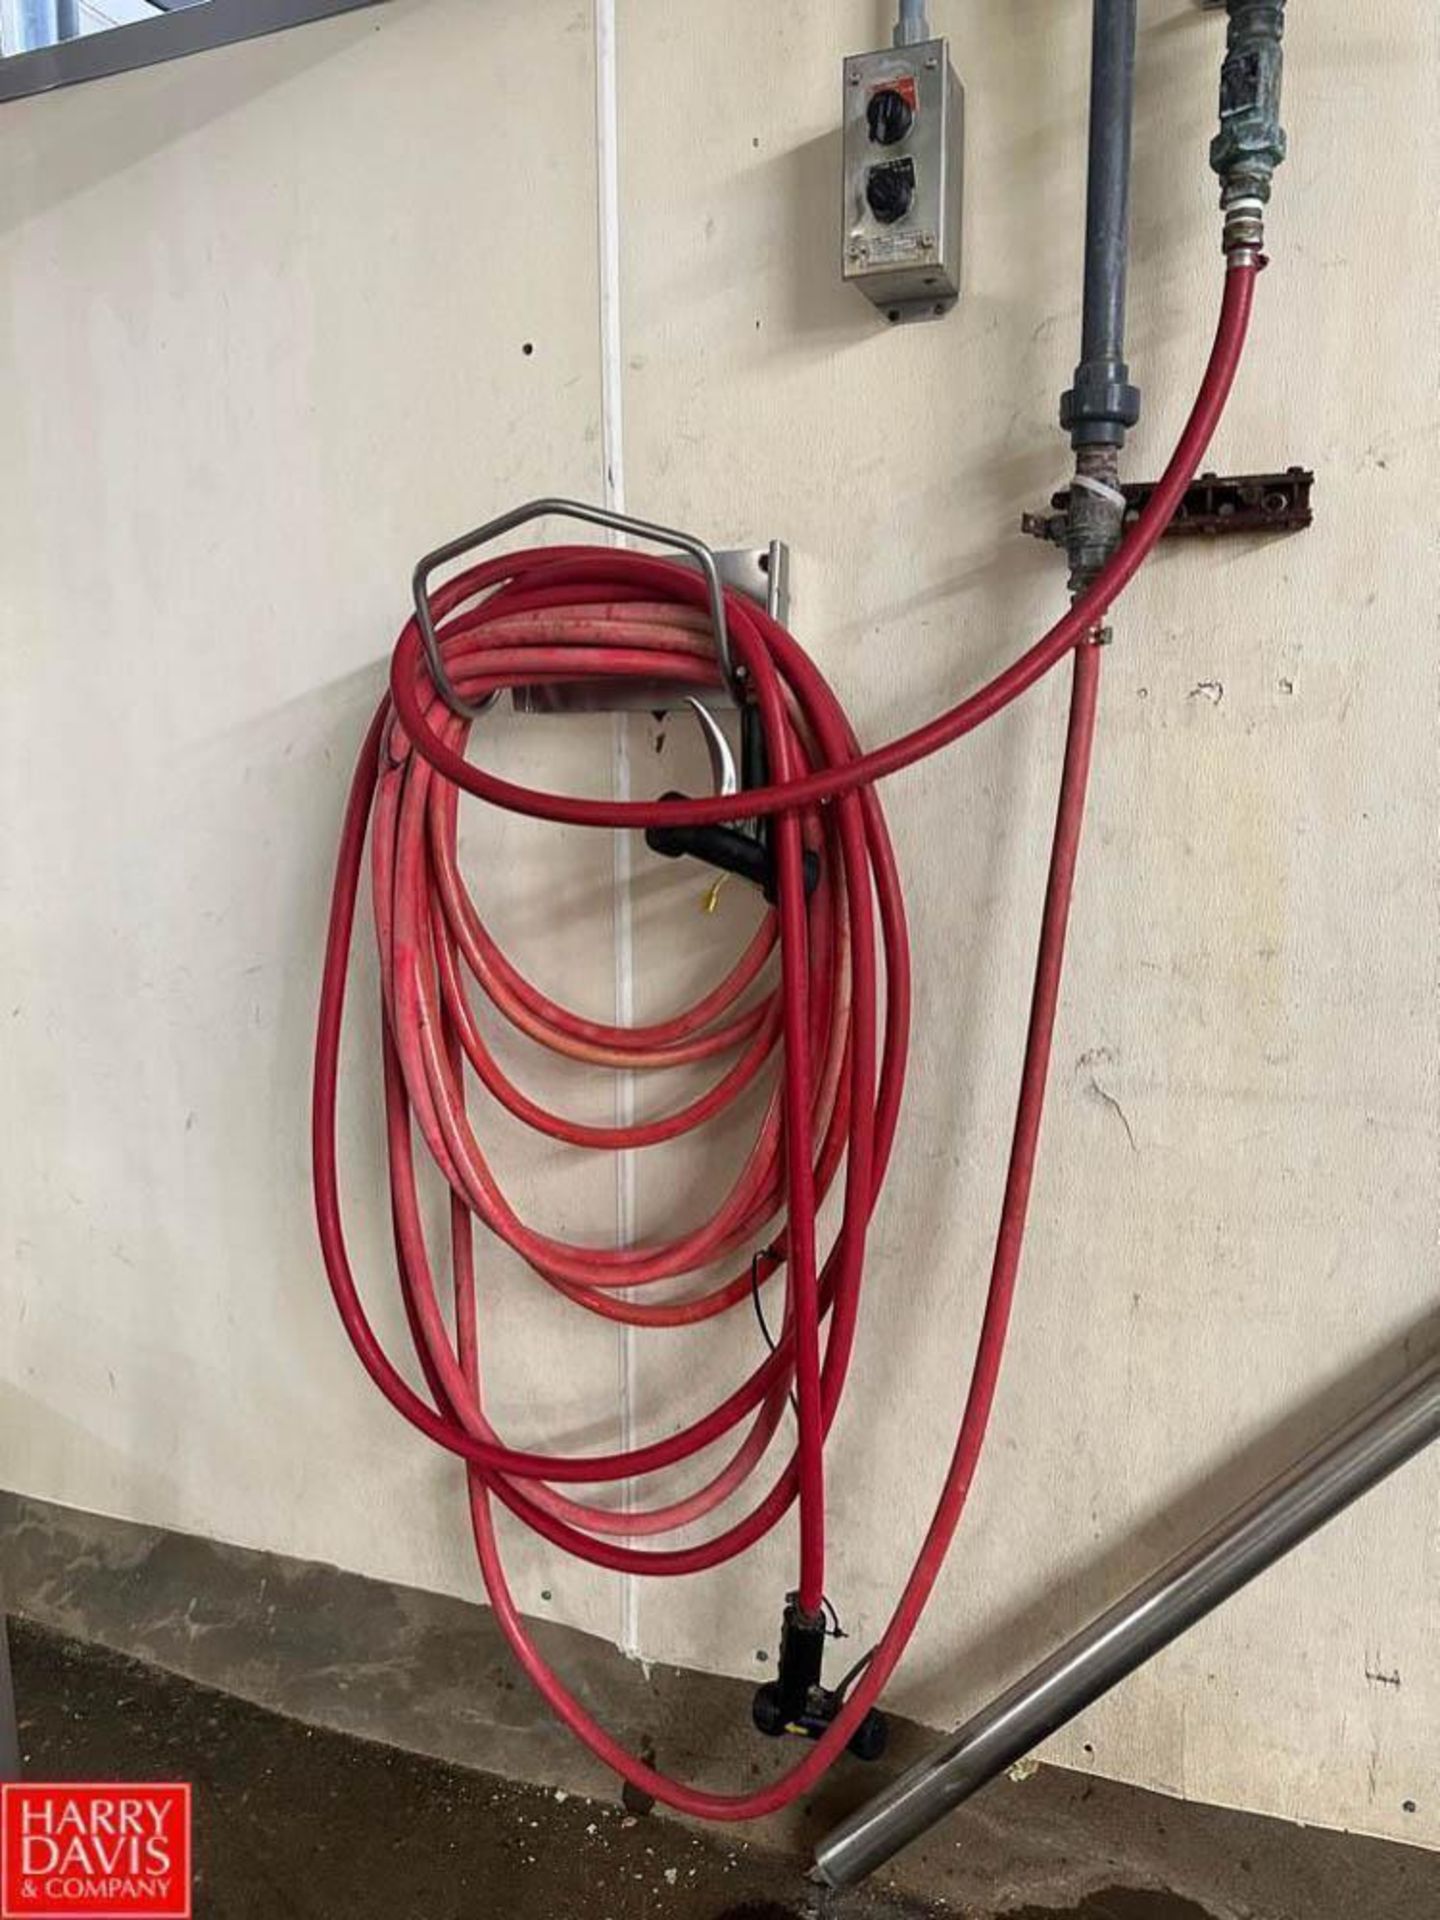 Hose Stations with Spray Guns - Rigging Fee: $125 - Image 3 of 3